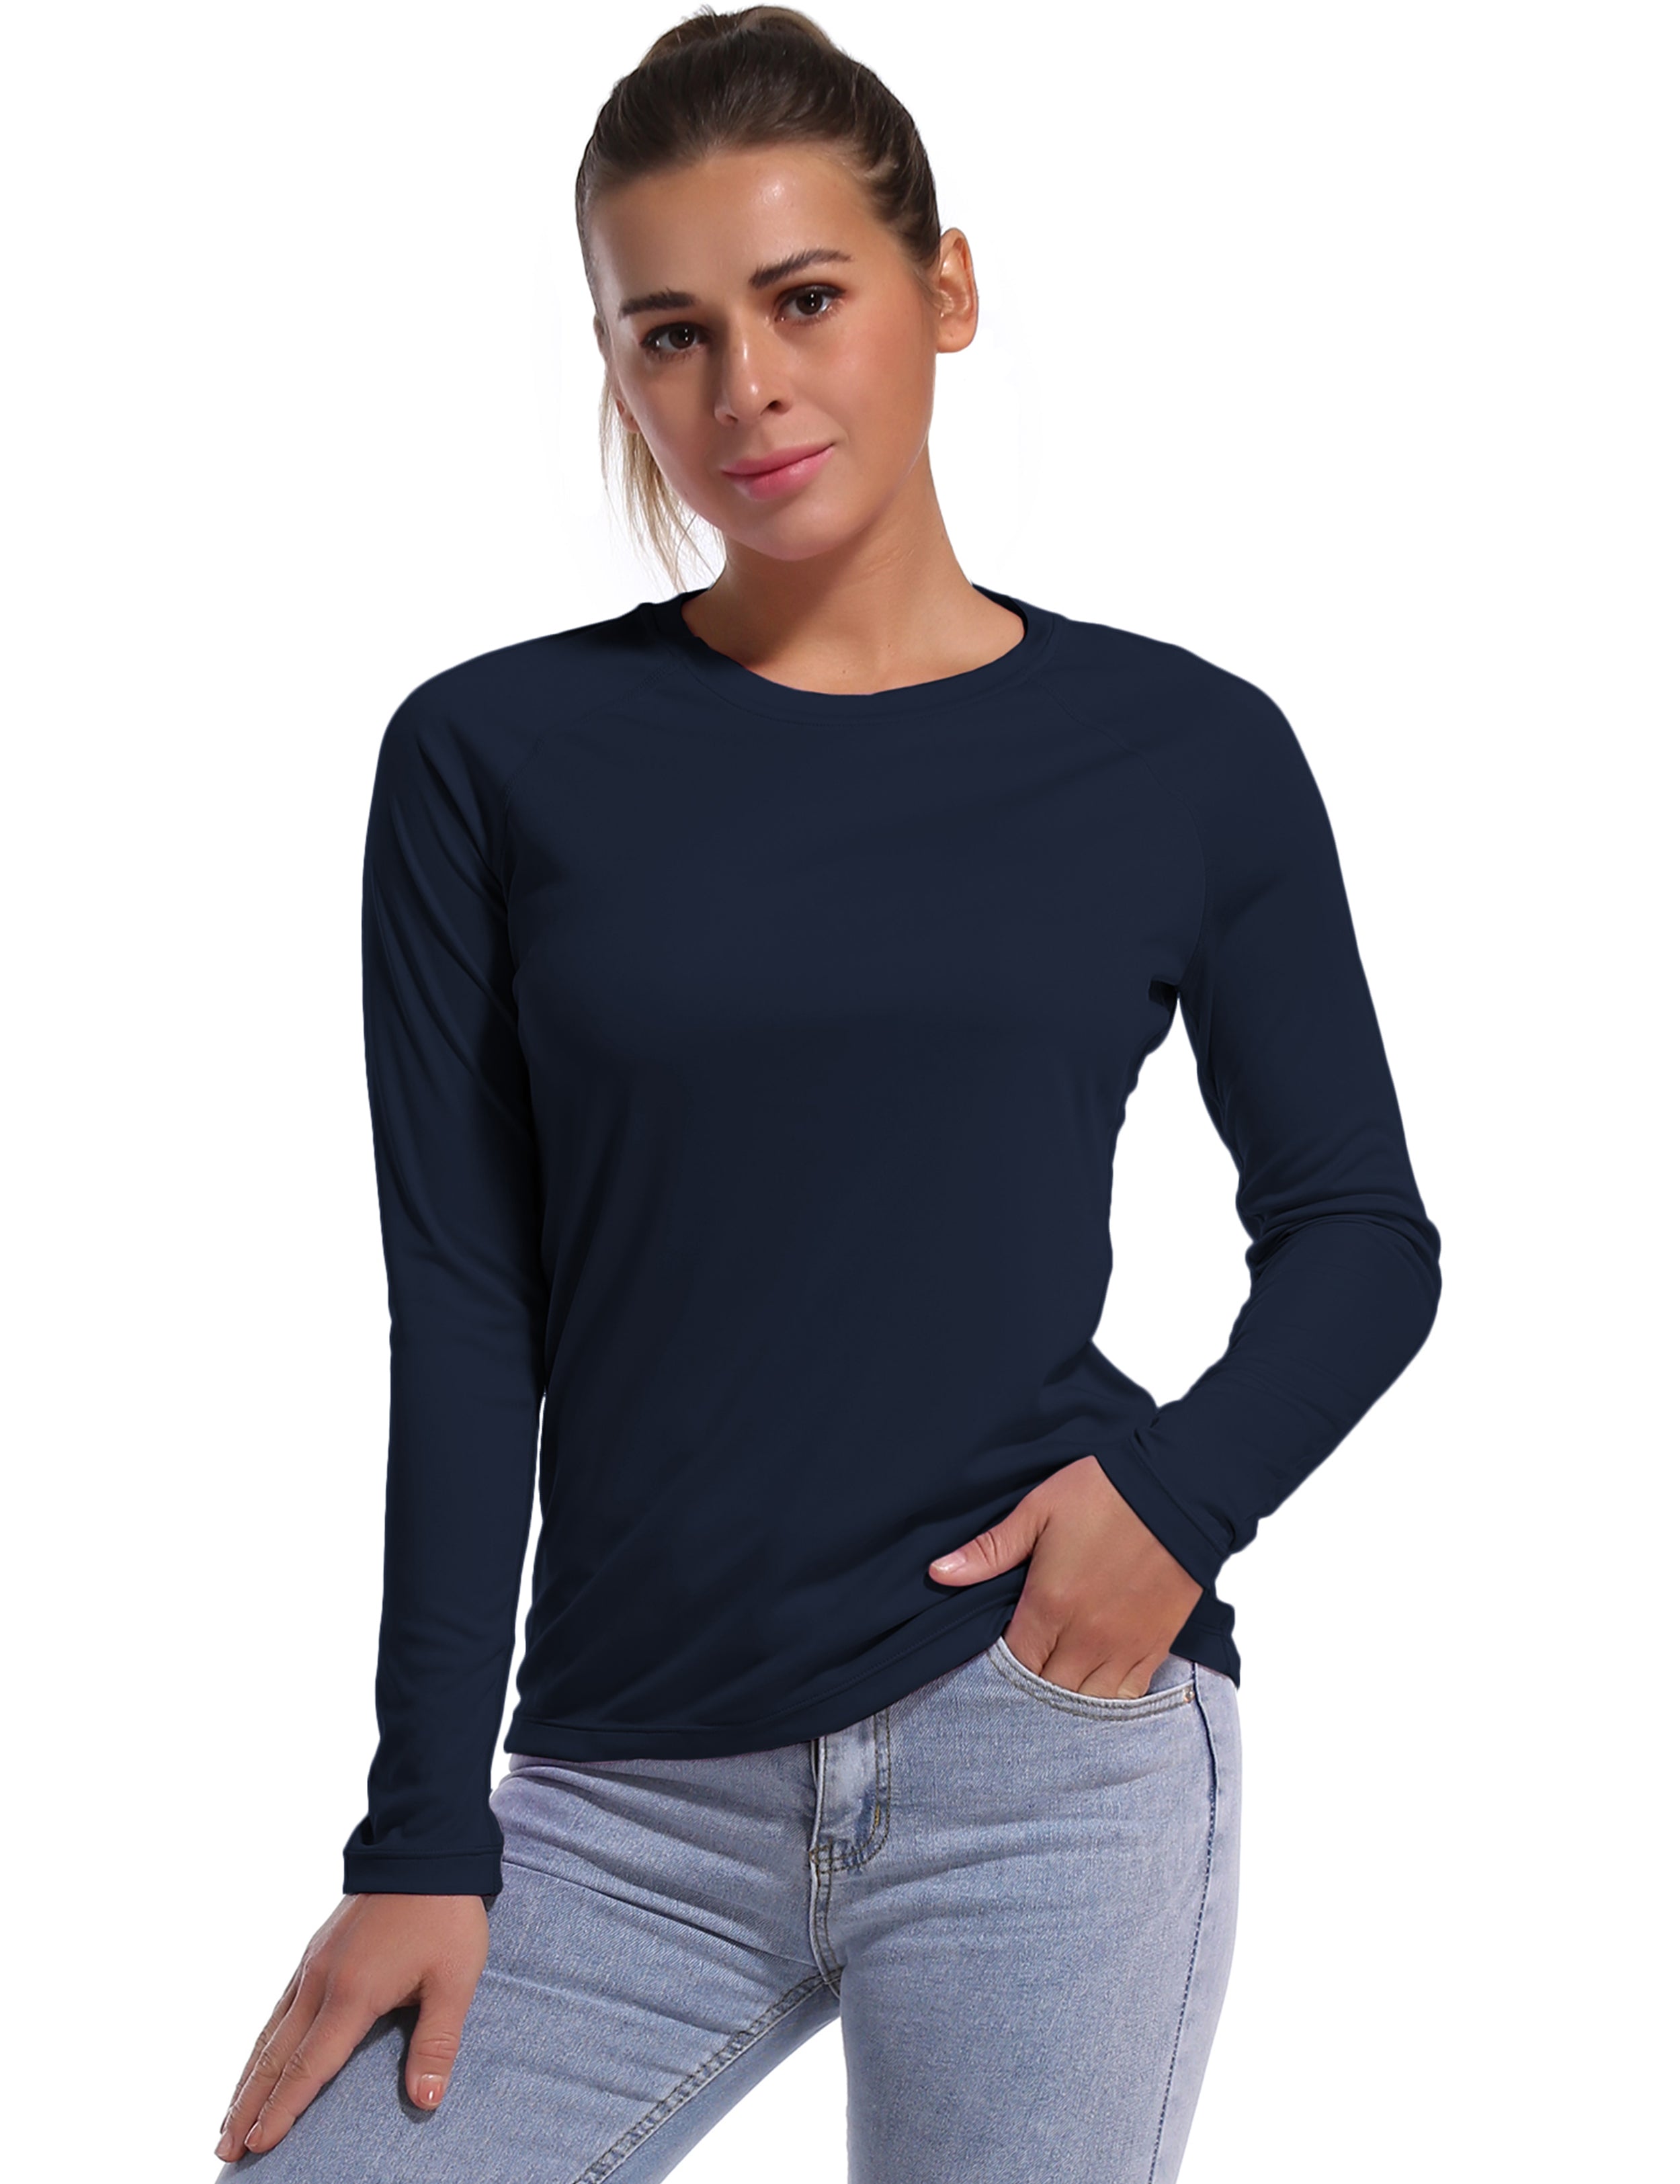 Long Sleeve Athletic Shirts darknavy 100% polyester Lightweight Slim Fit UPF 50+ blocks sun's harmful rays Treated to wick moisture, dries ultra-fast